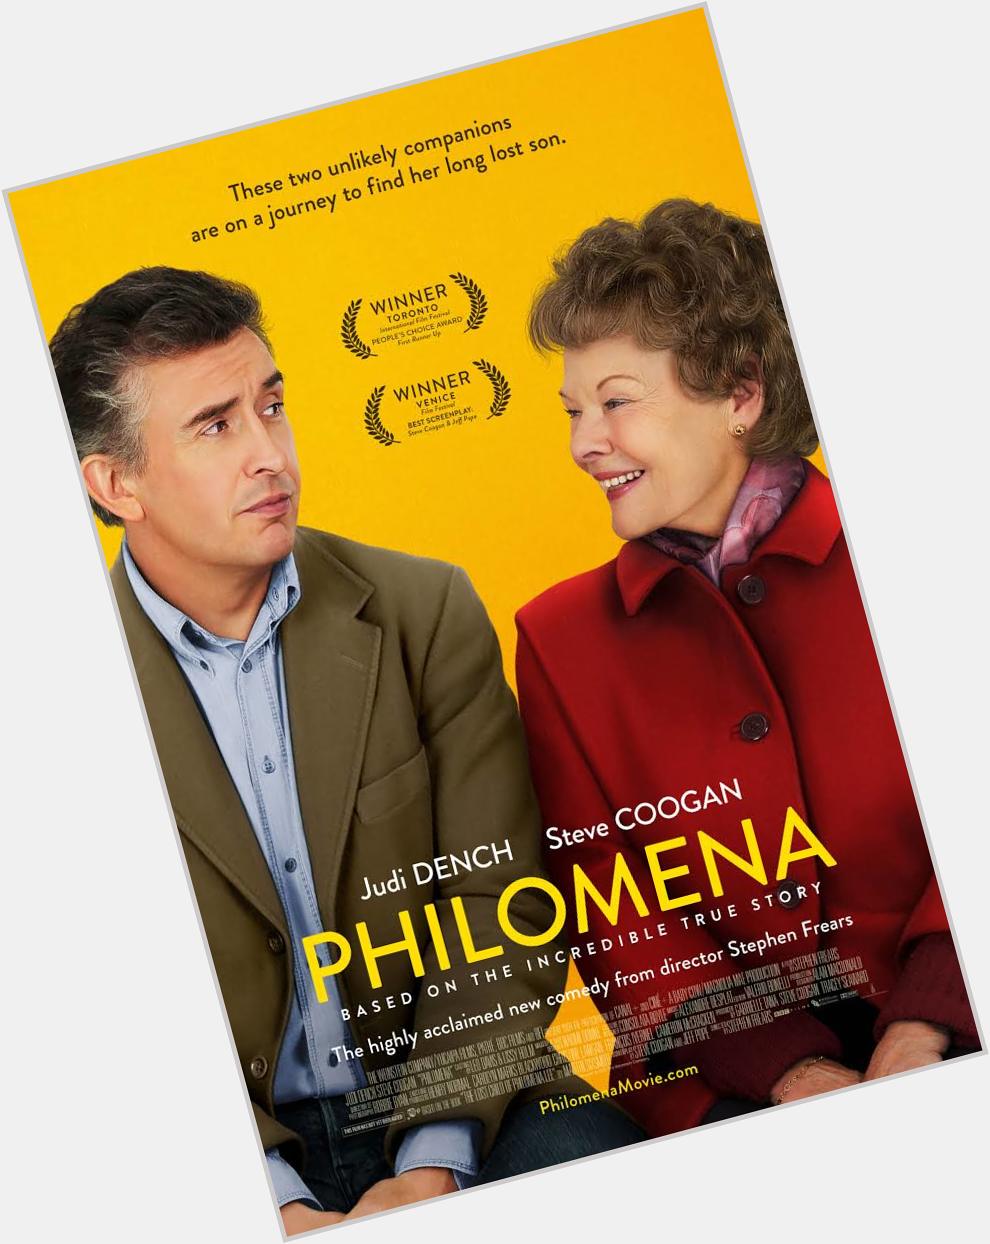 Happy 50th Birthday to Steve Coogan, whose character Martin Sixsmith formed an bond w/ Philomena 